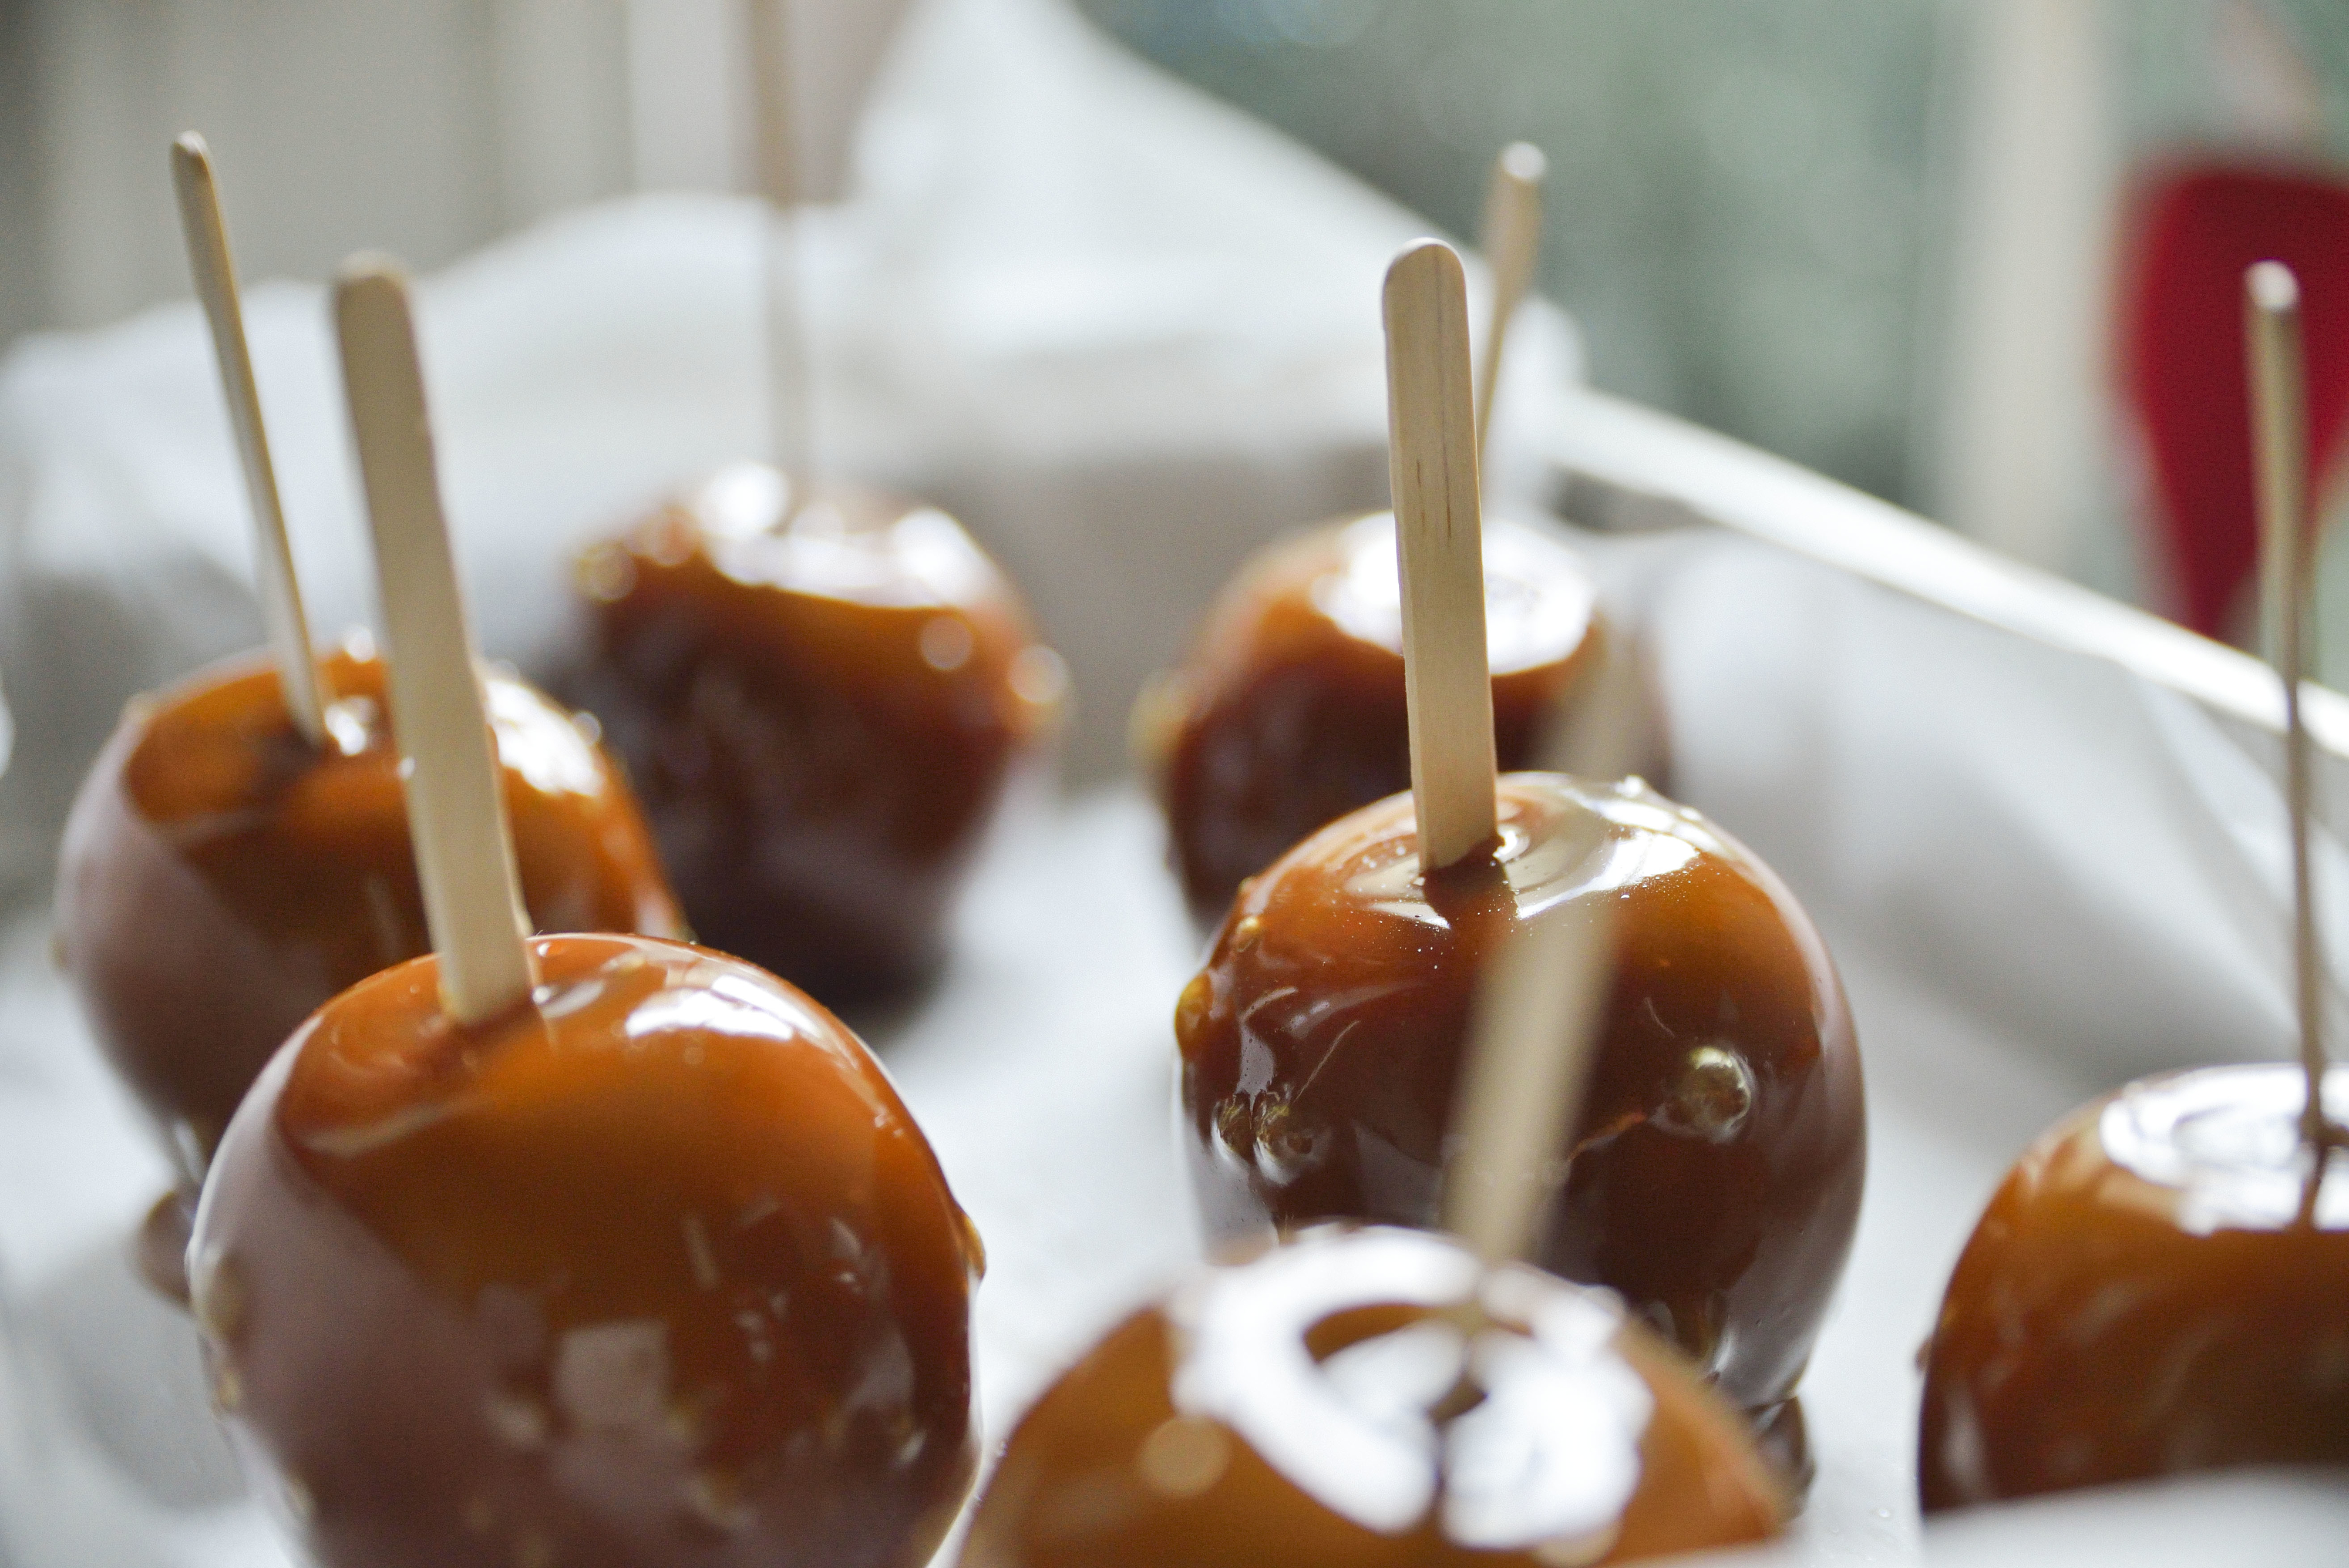 Caramel apples with sticks on a tray, depicted up close